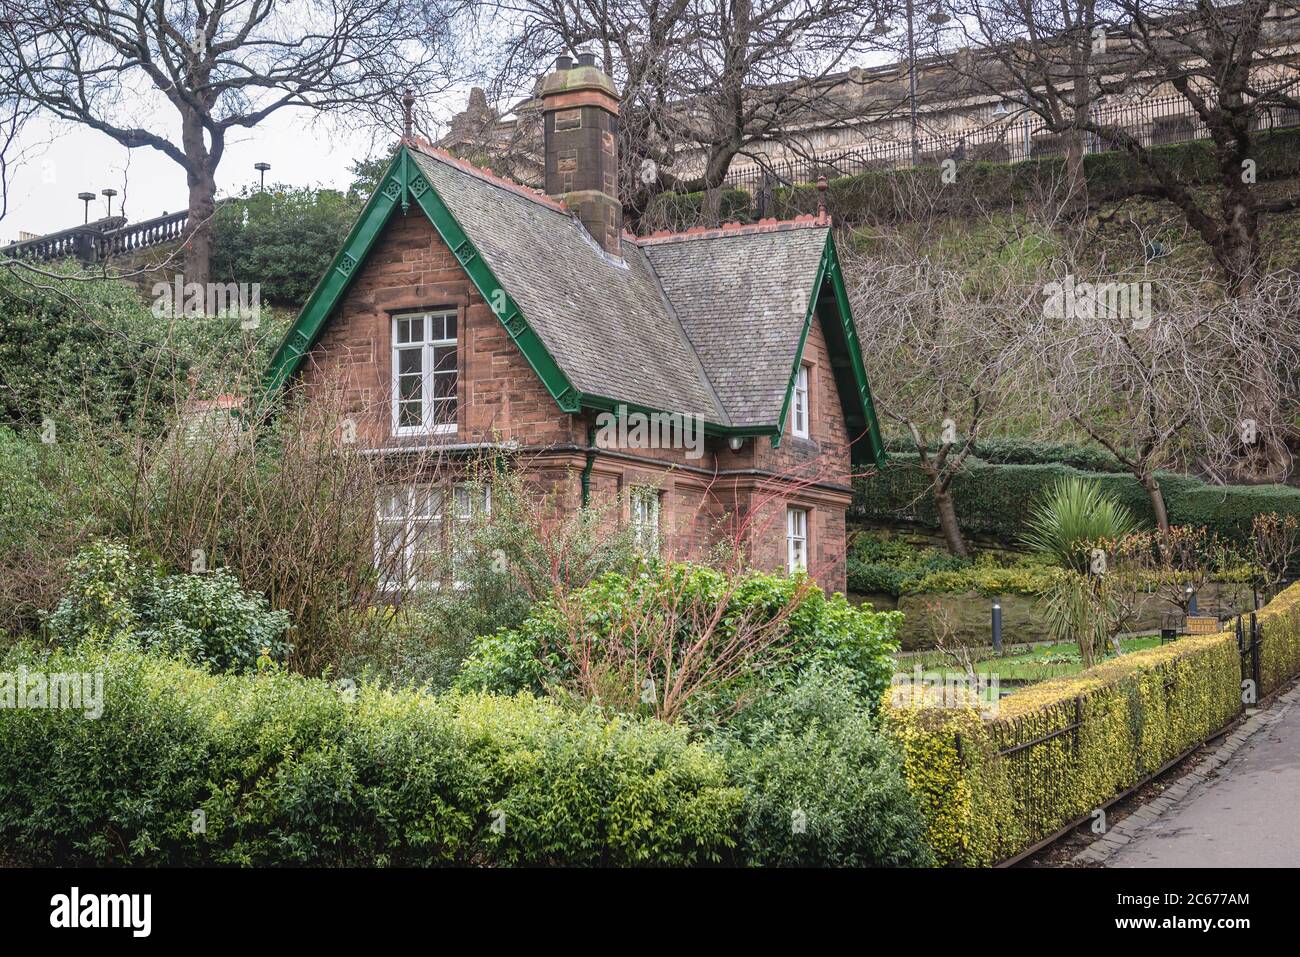 Head Gardeners cottage also known as Great Aunt Lizzies house in Princes Street Gardens public park in Edinburgh, the capital of Scotland, part of UK Stock Photo